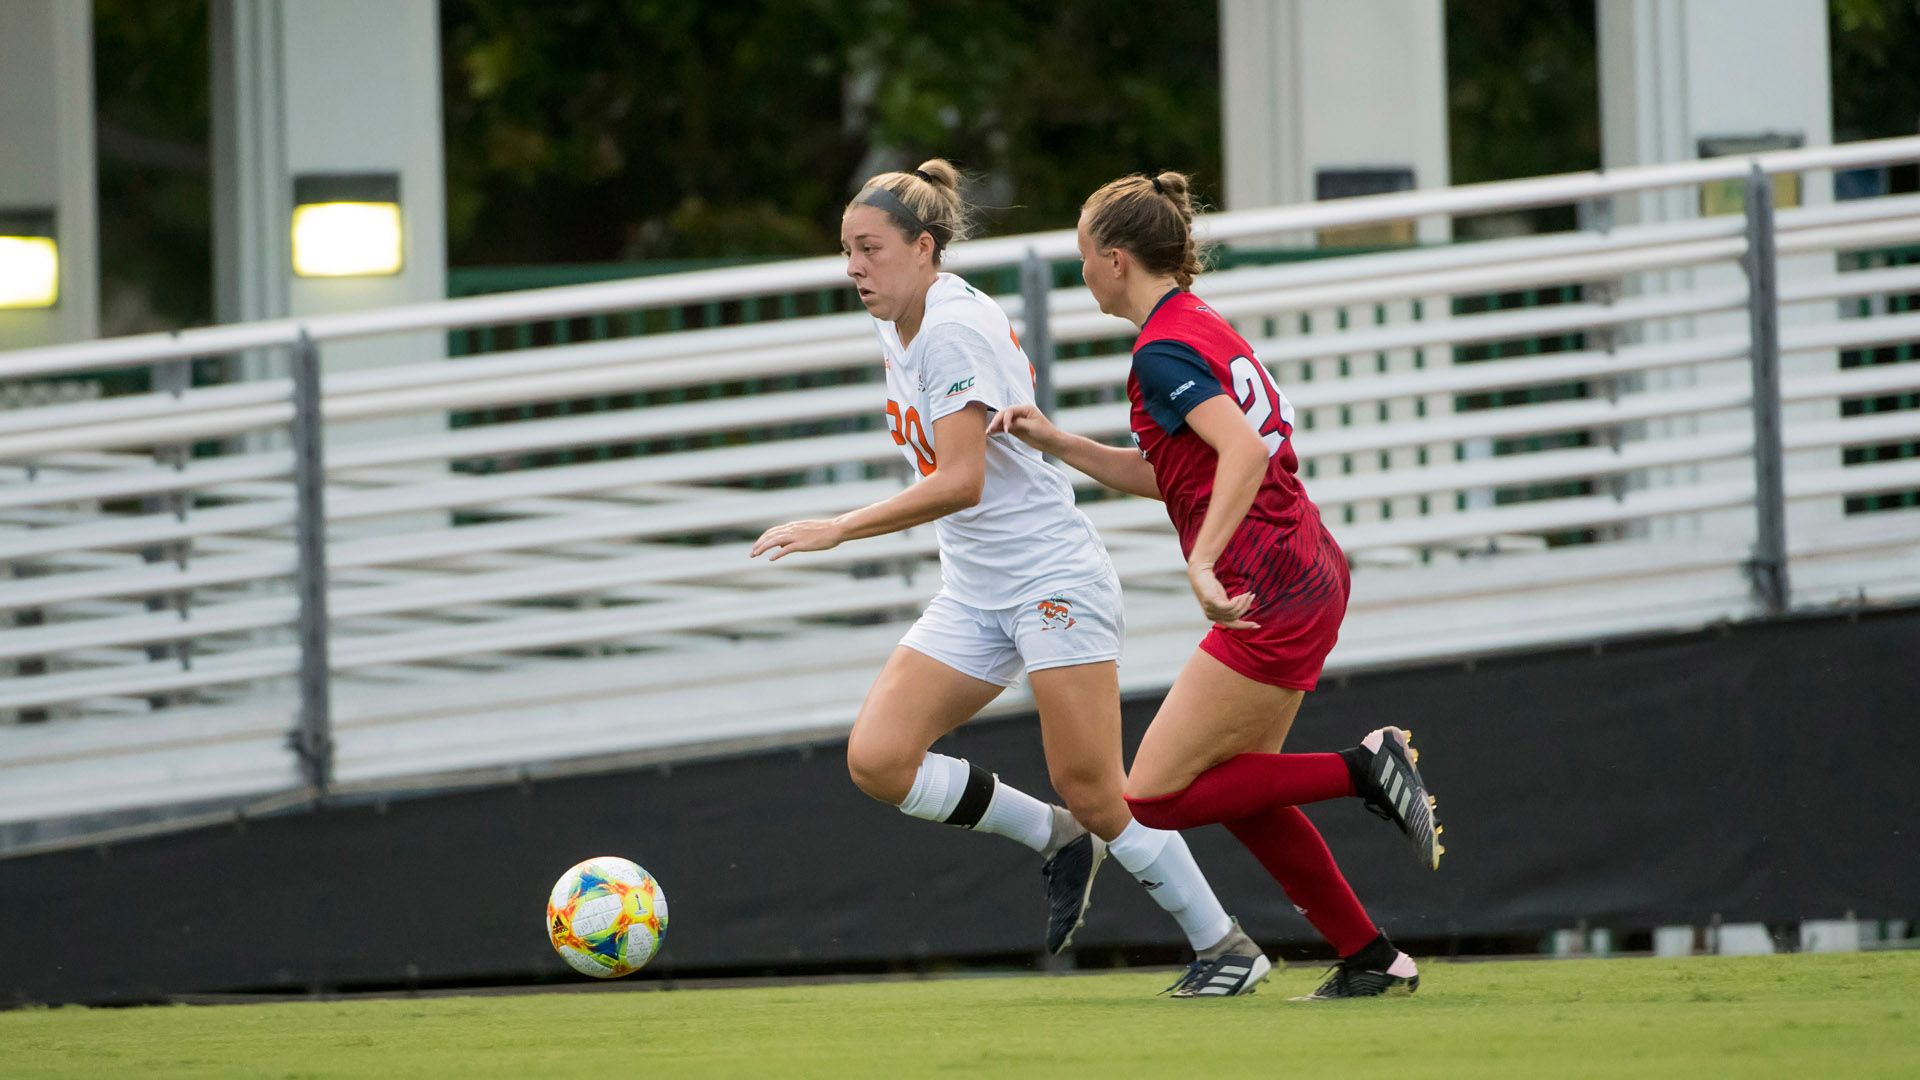 Miami Comes up Short against No. 12 Louisville, 1-0